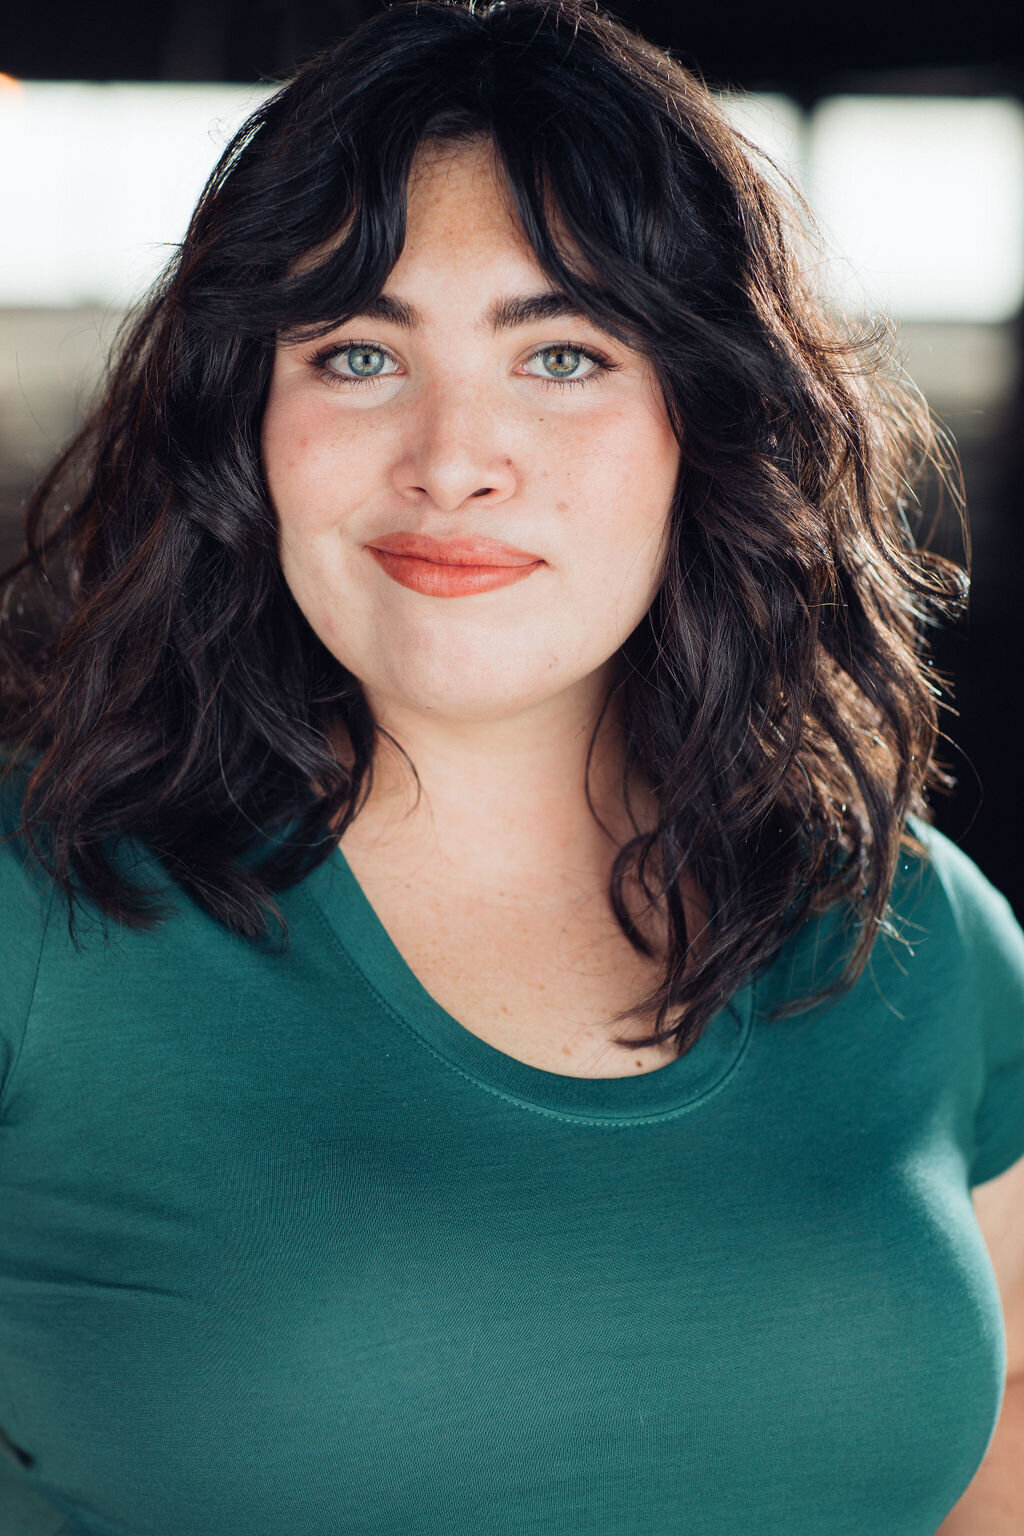 Headshot Photograph Of Young Woman In Blue Green Shirt Los Angeles